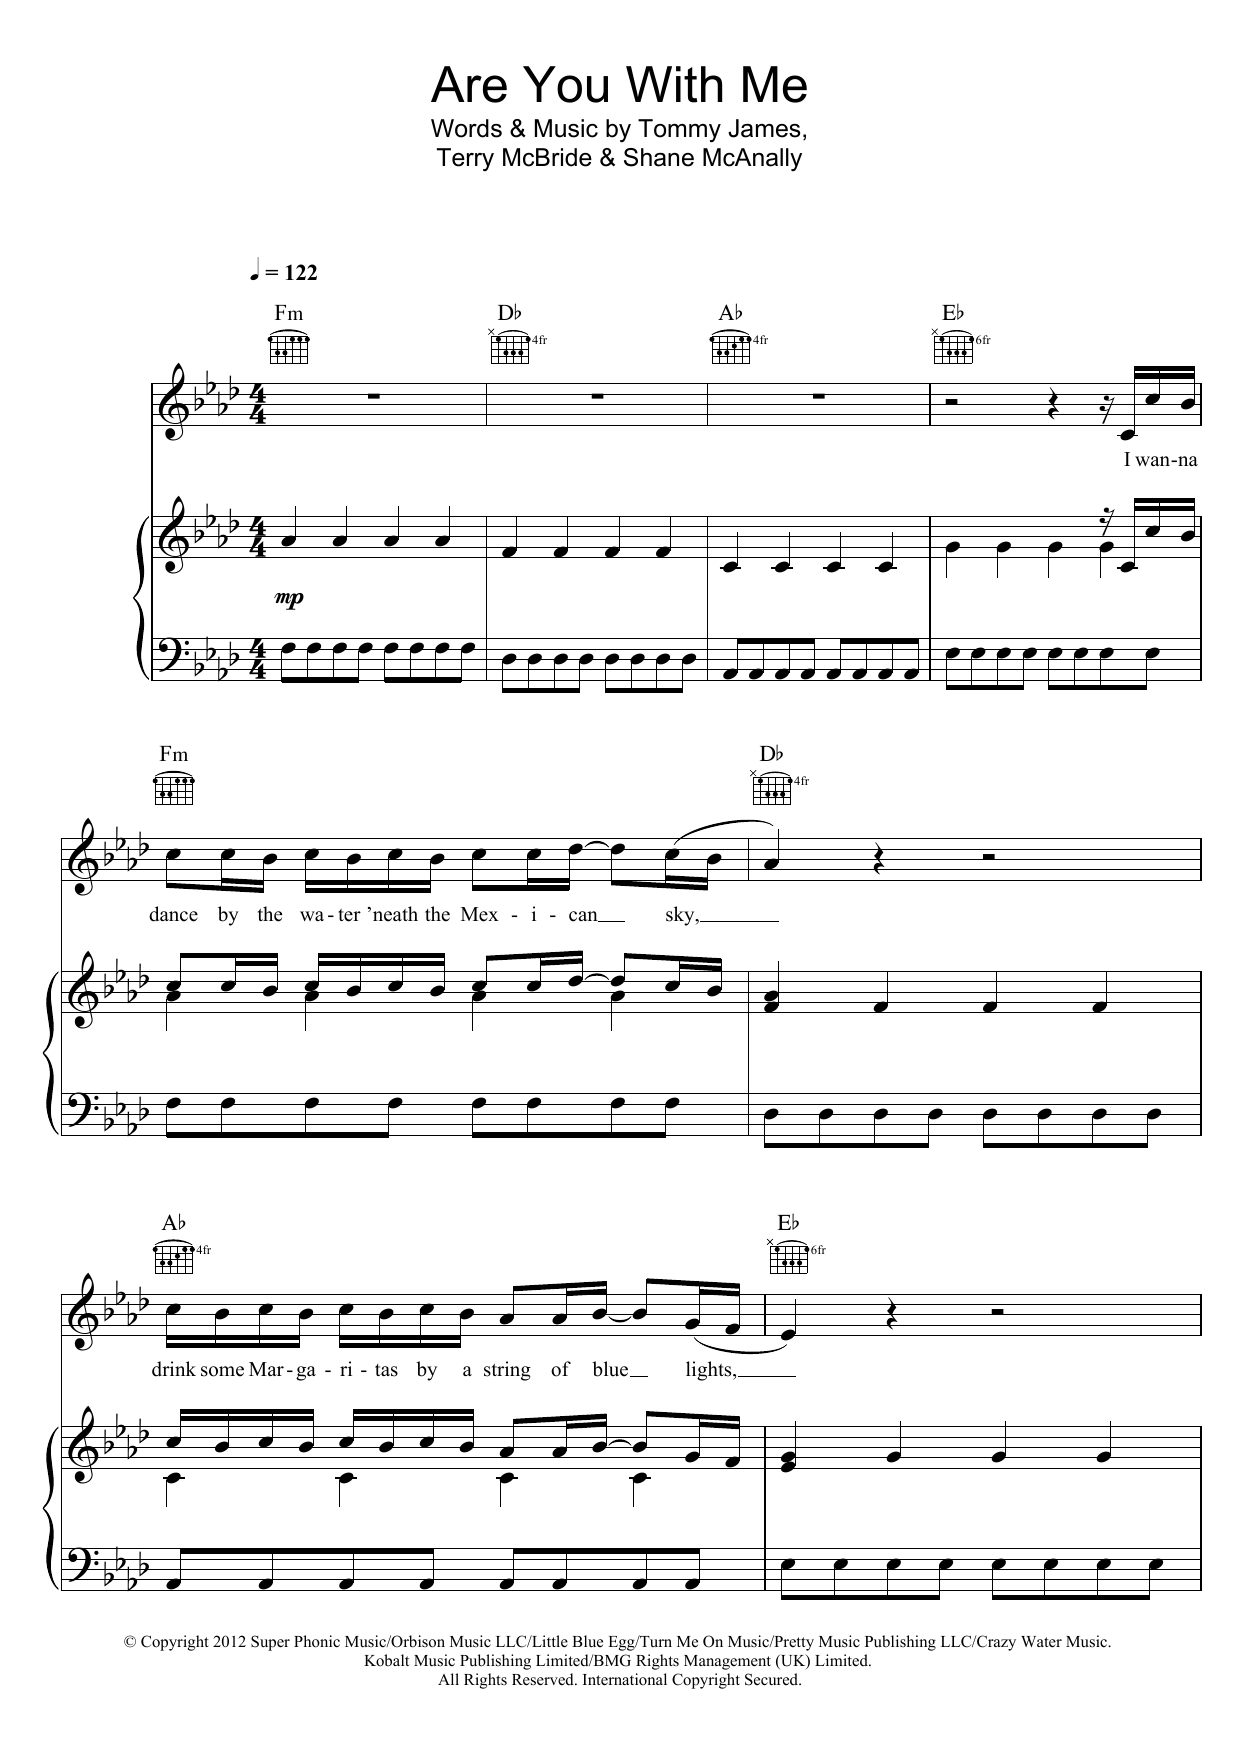 Download Lost Frequencies Are You With Me Sheet Music